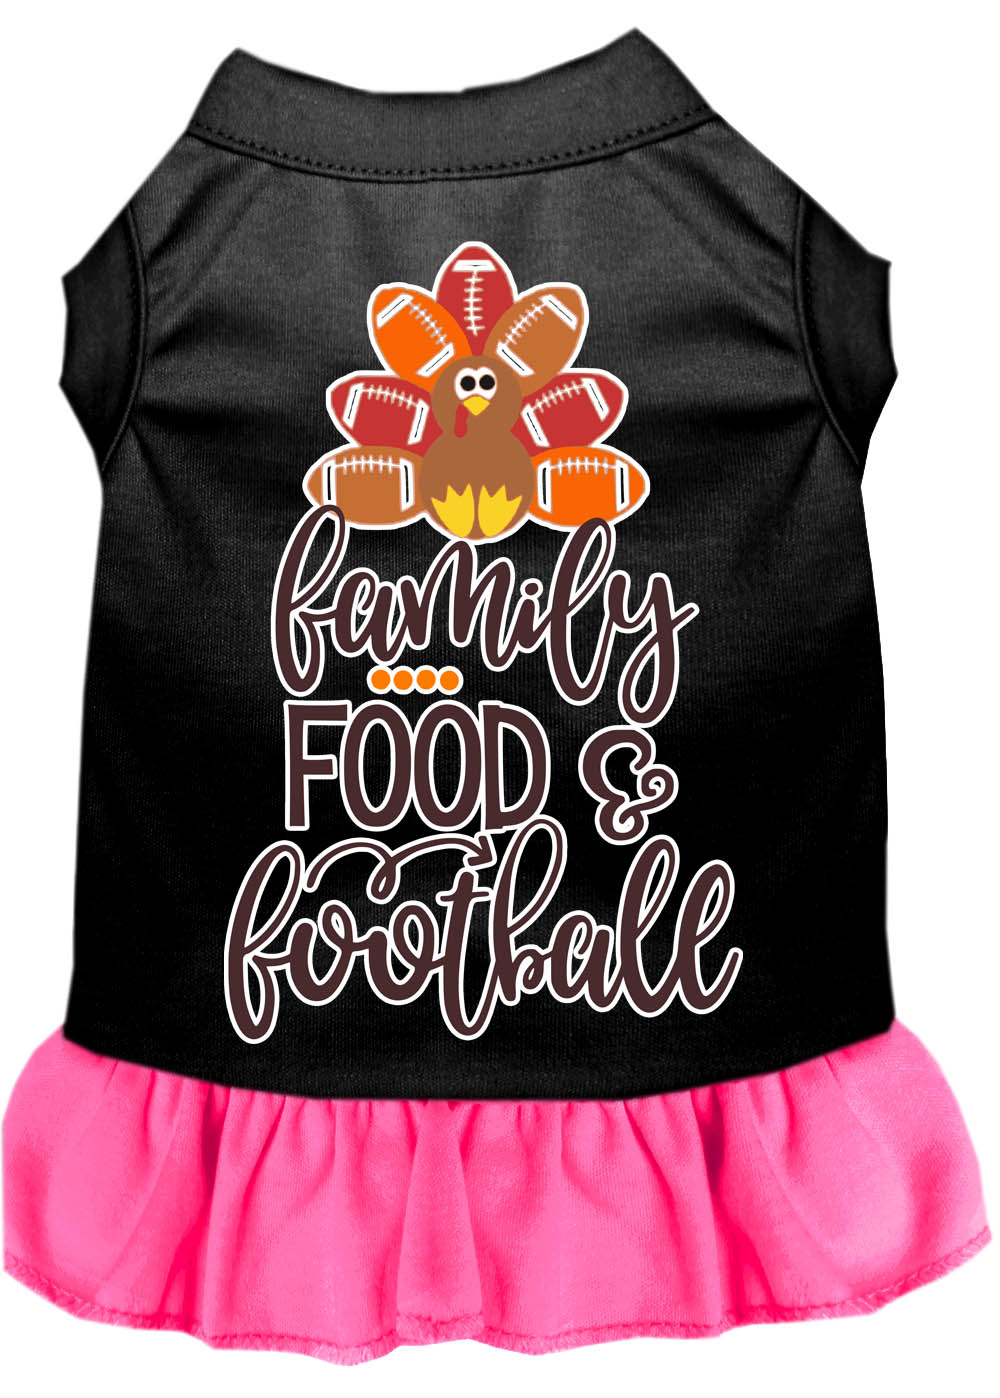 Family, Food, and Football Screen Print Dog Dress Black with Bright Pink Sm